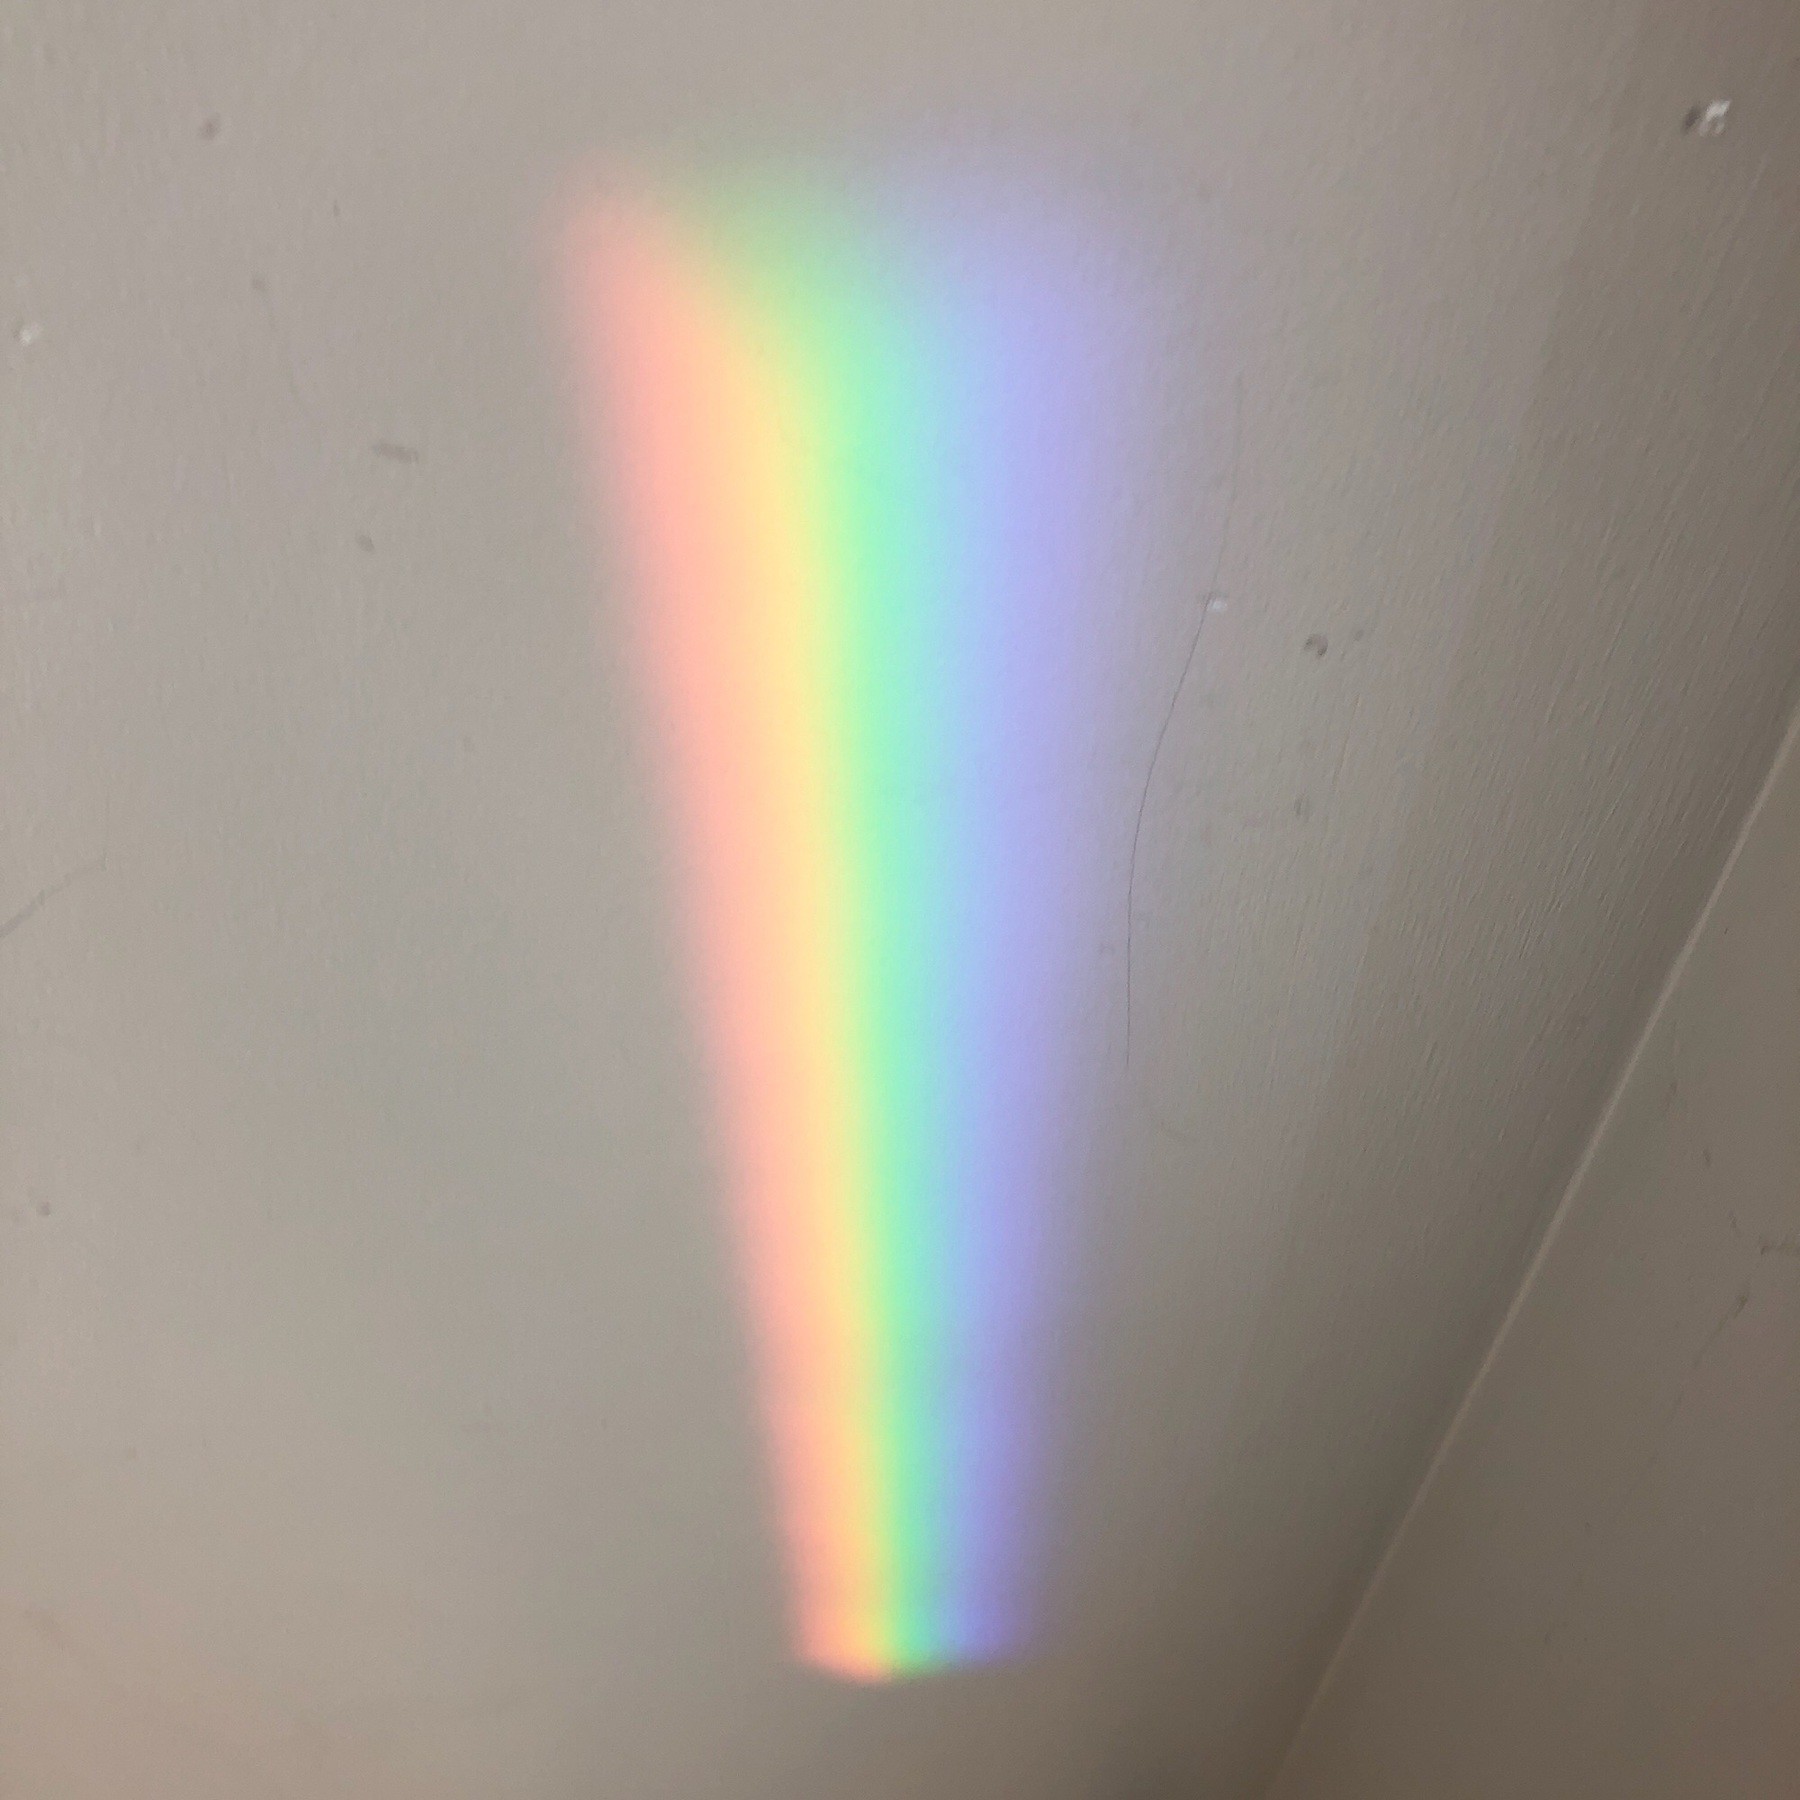 Refracted light on wall.